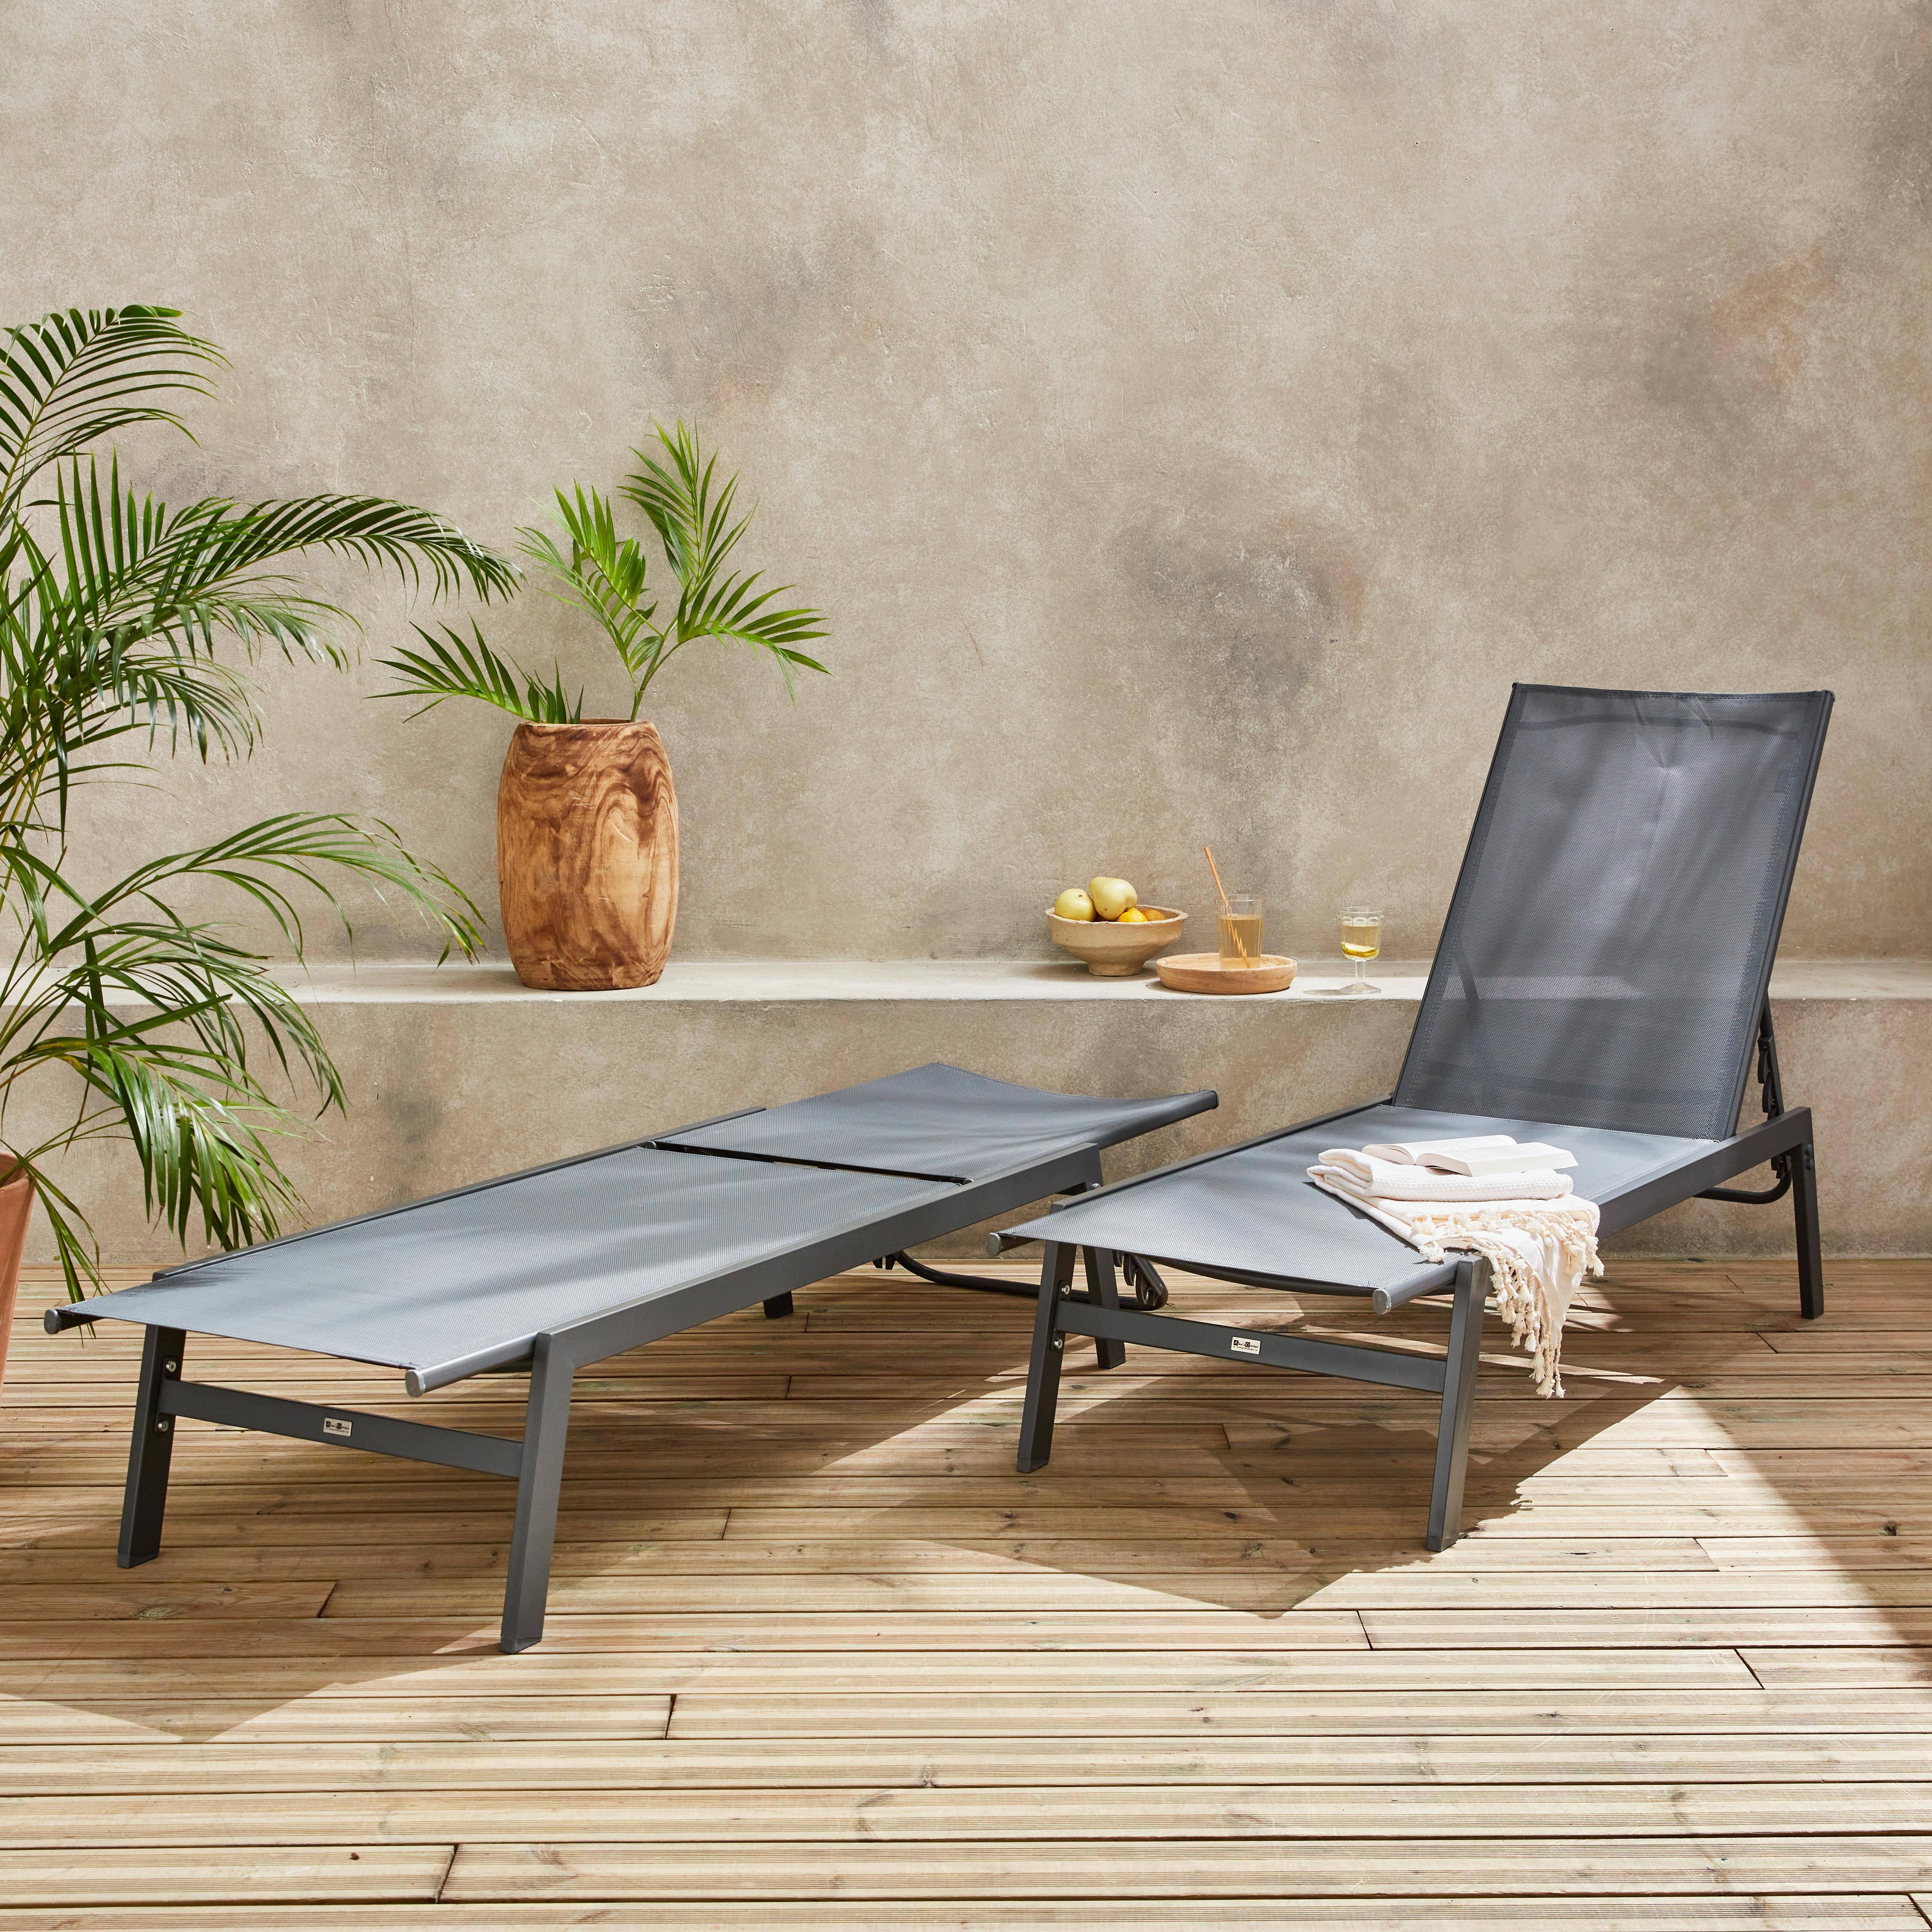 Pair of Textilene and Metal Multi-Position Sun Loungers, Anthracite Photo2